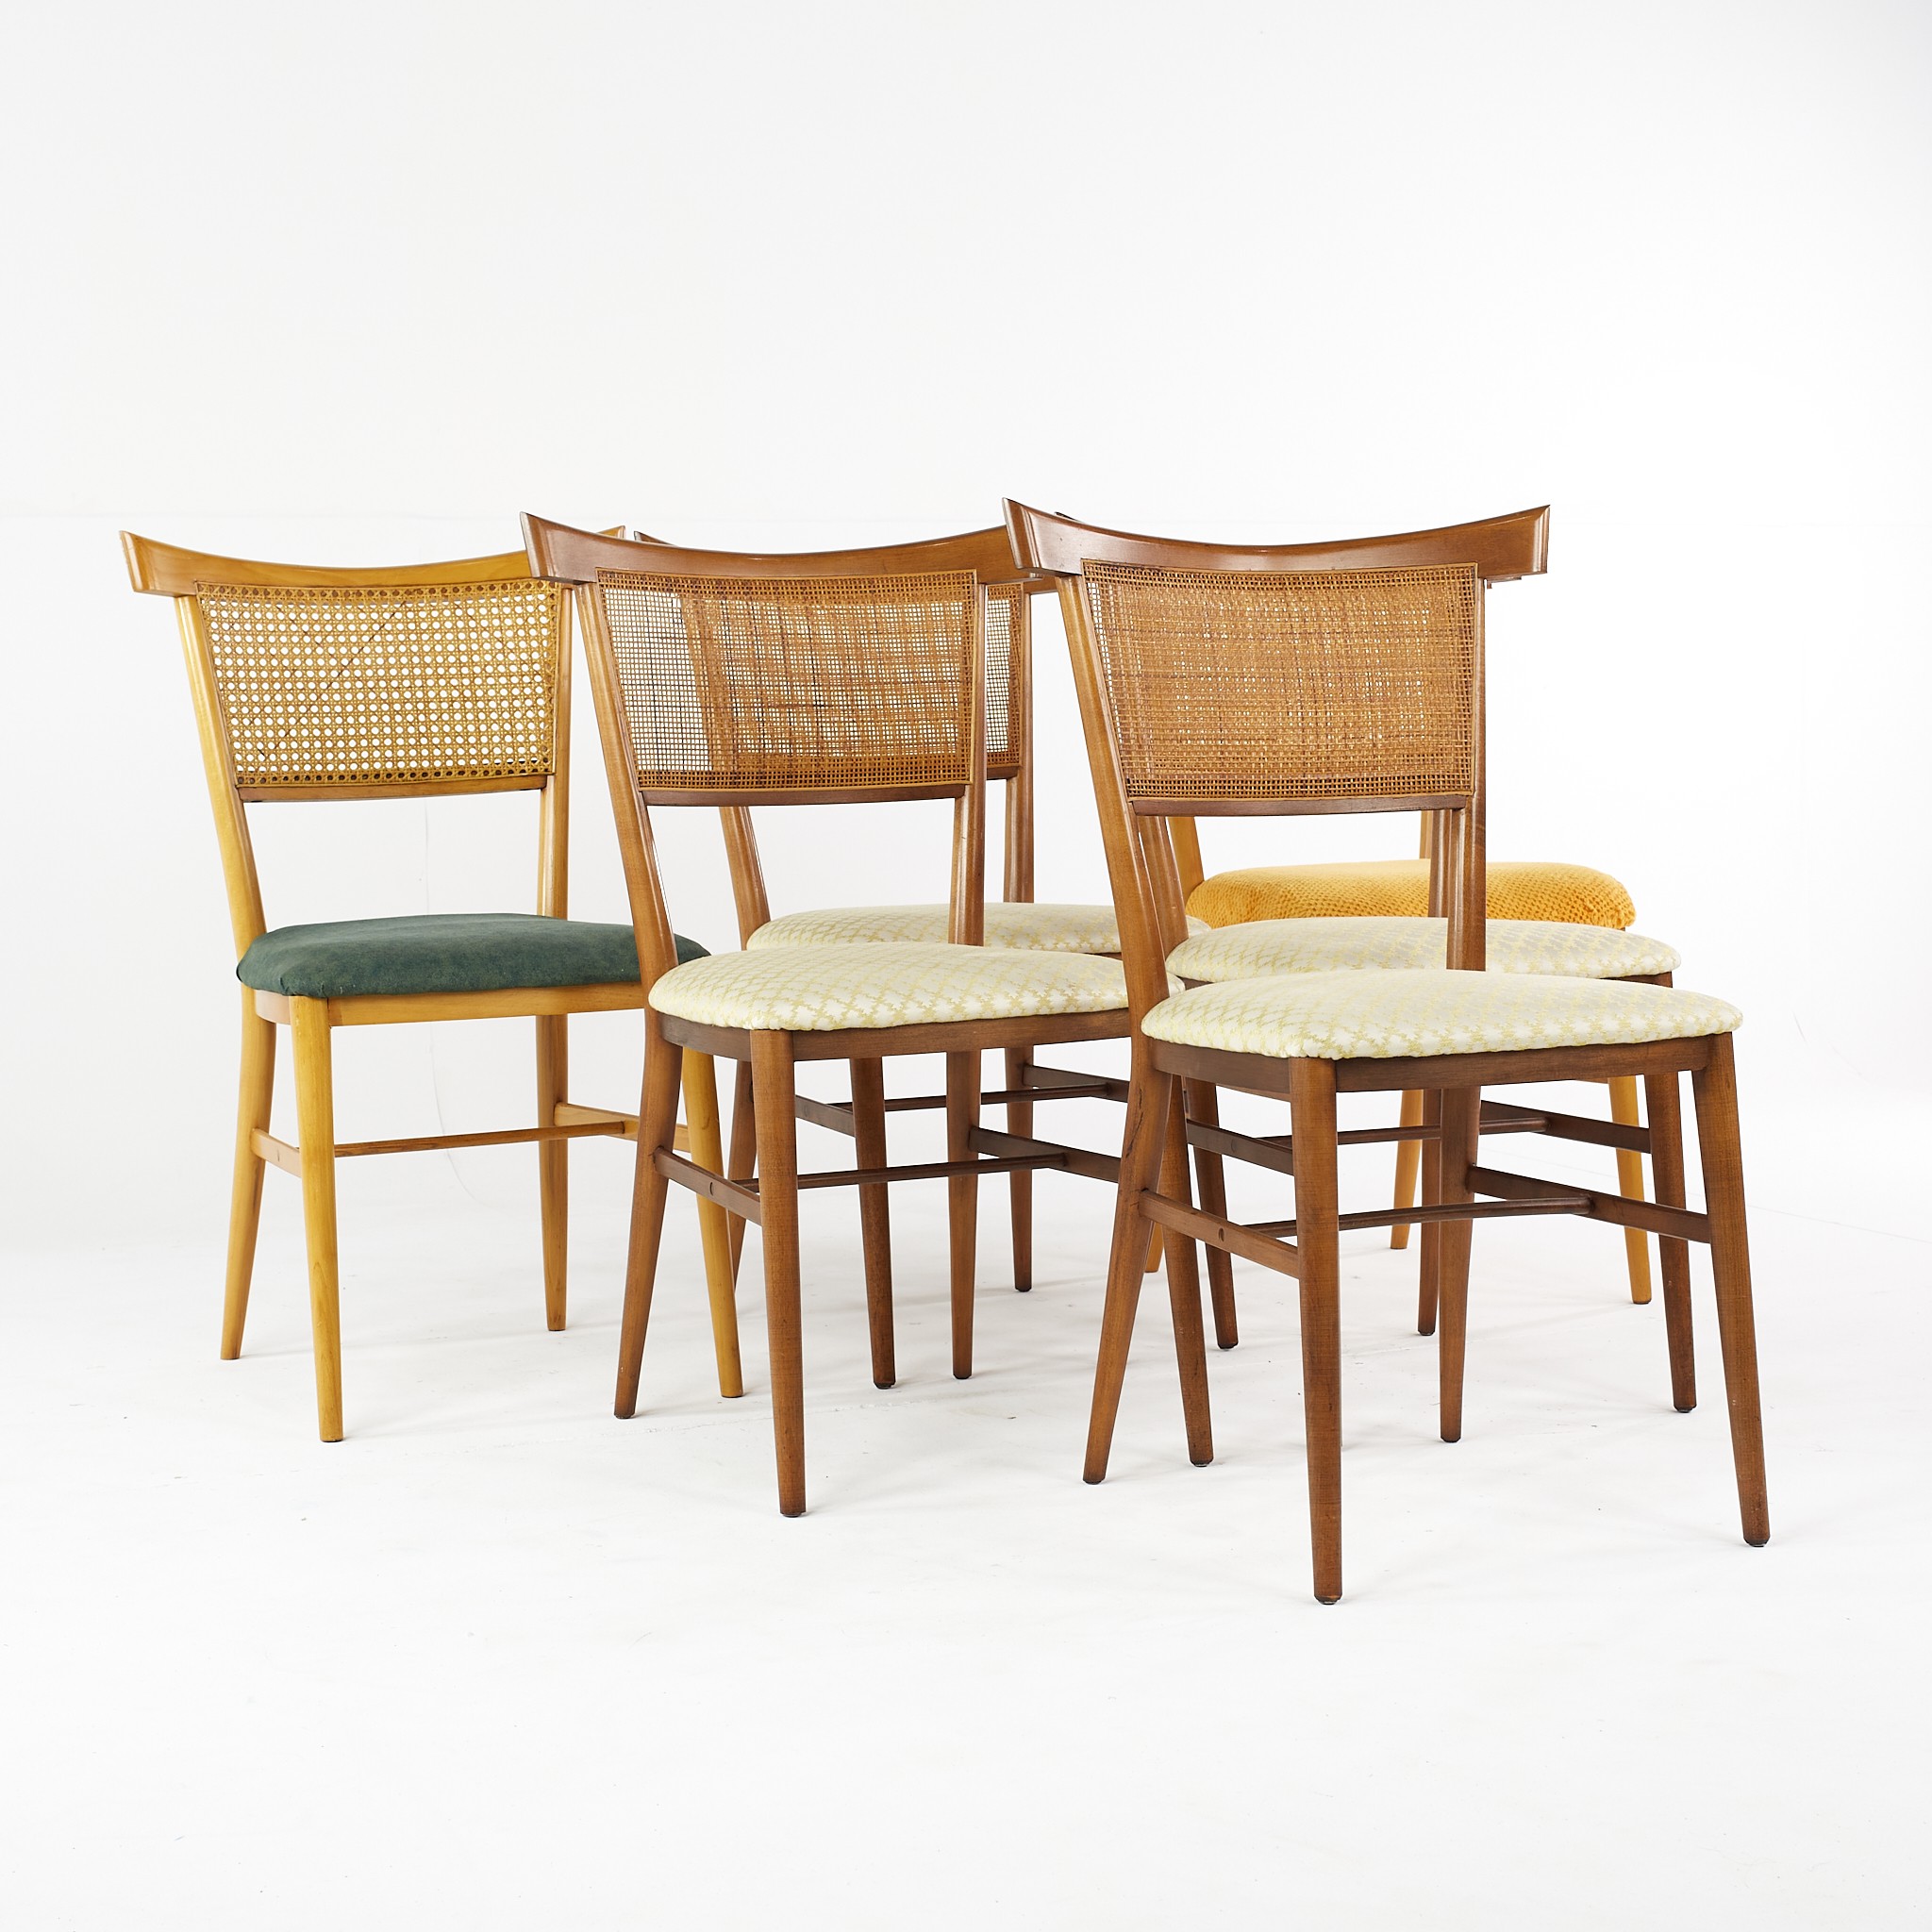 Paul Mccobb for Planner Group Winchendon Maple and Cane Dining Chairs - Set of 6